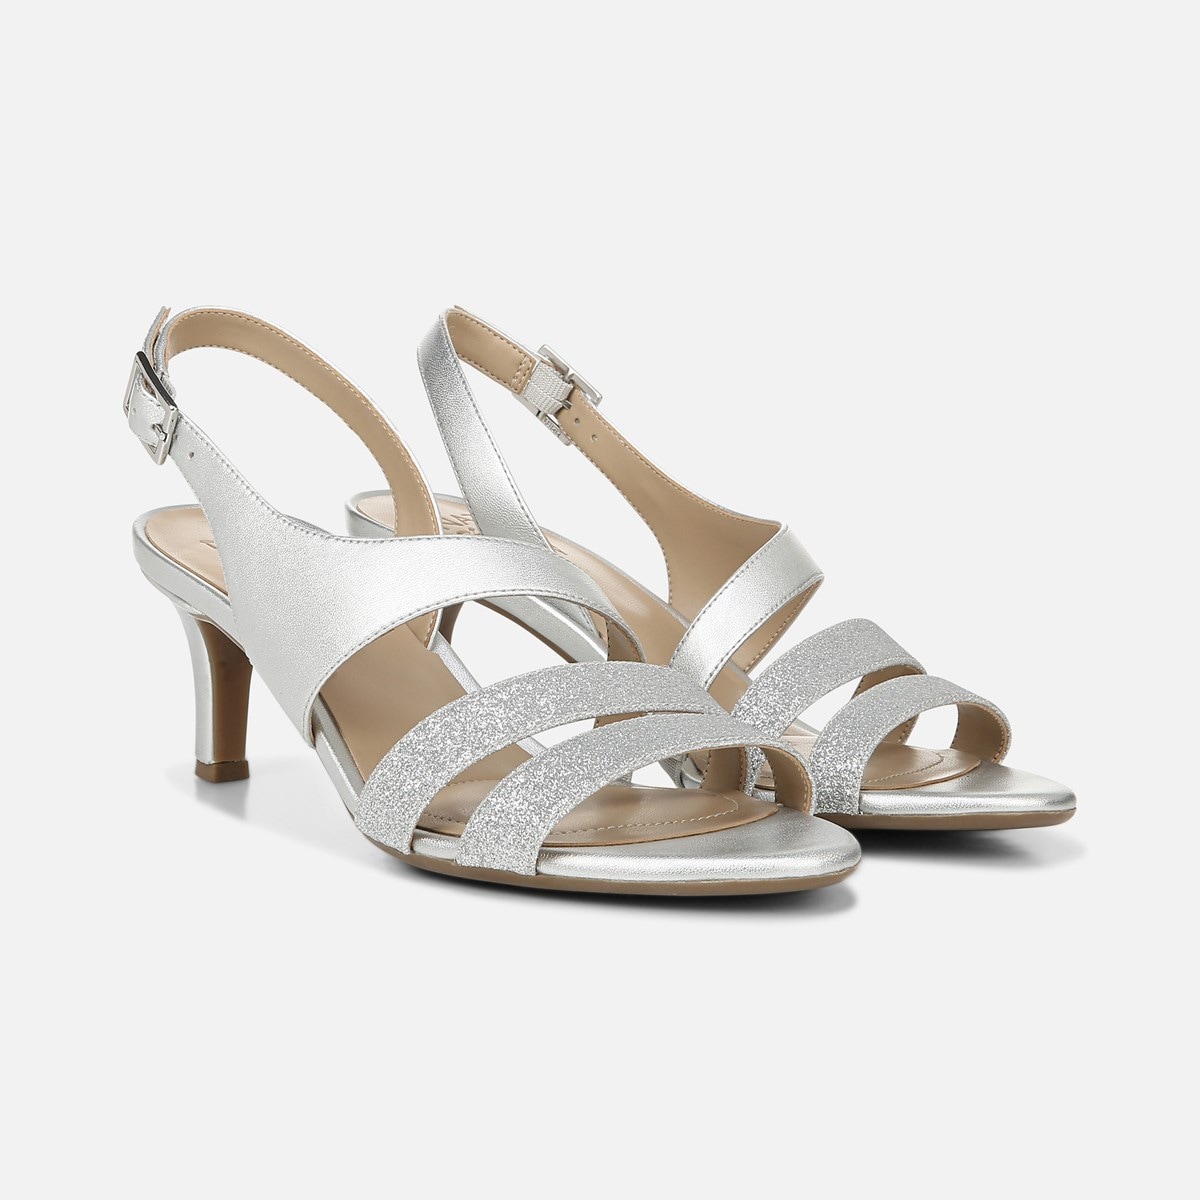 taimi sandals by naturalizer